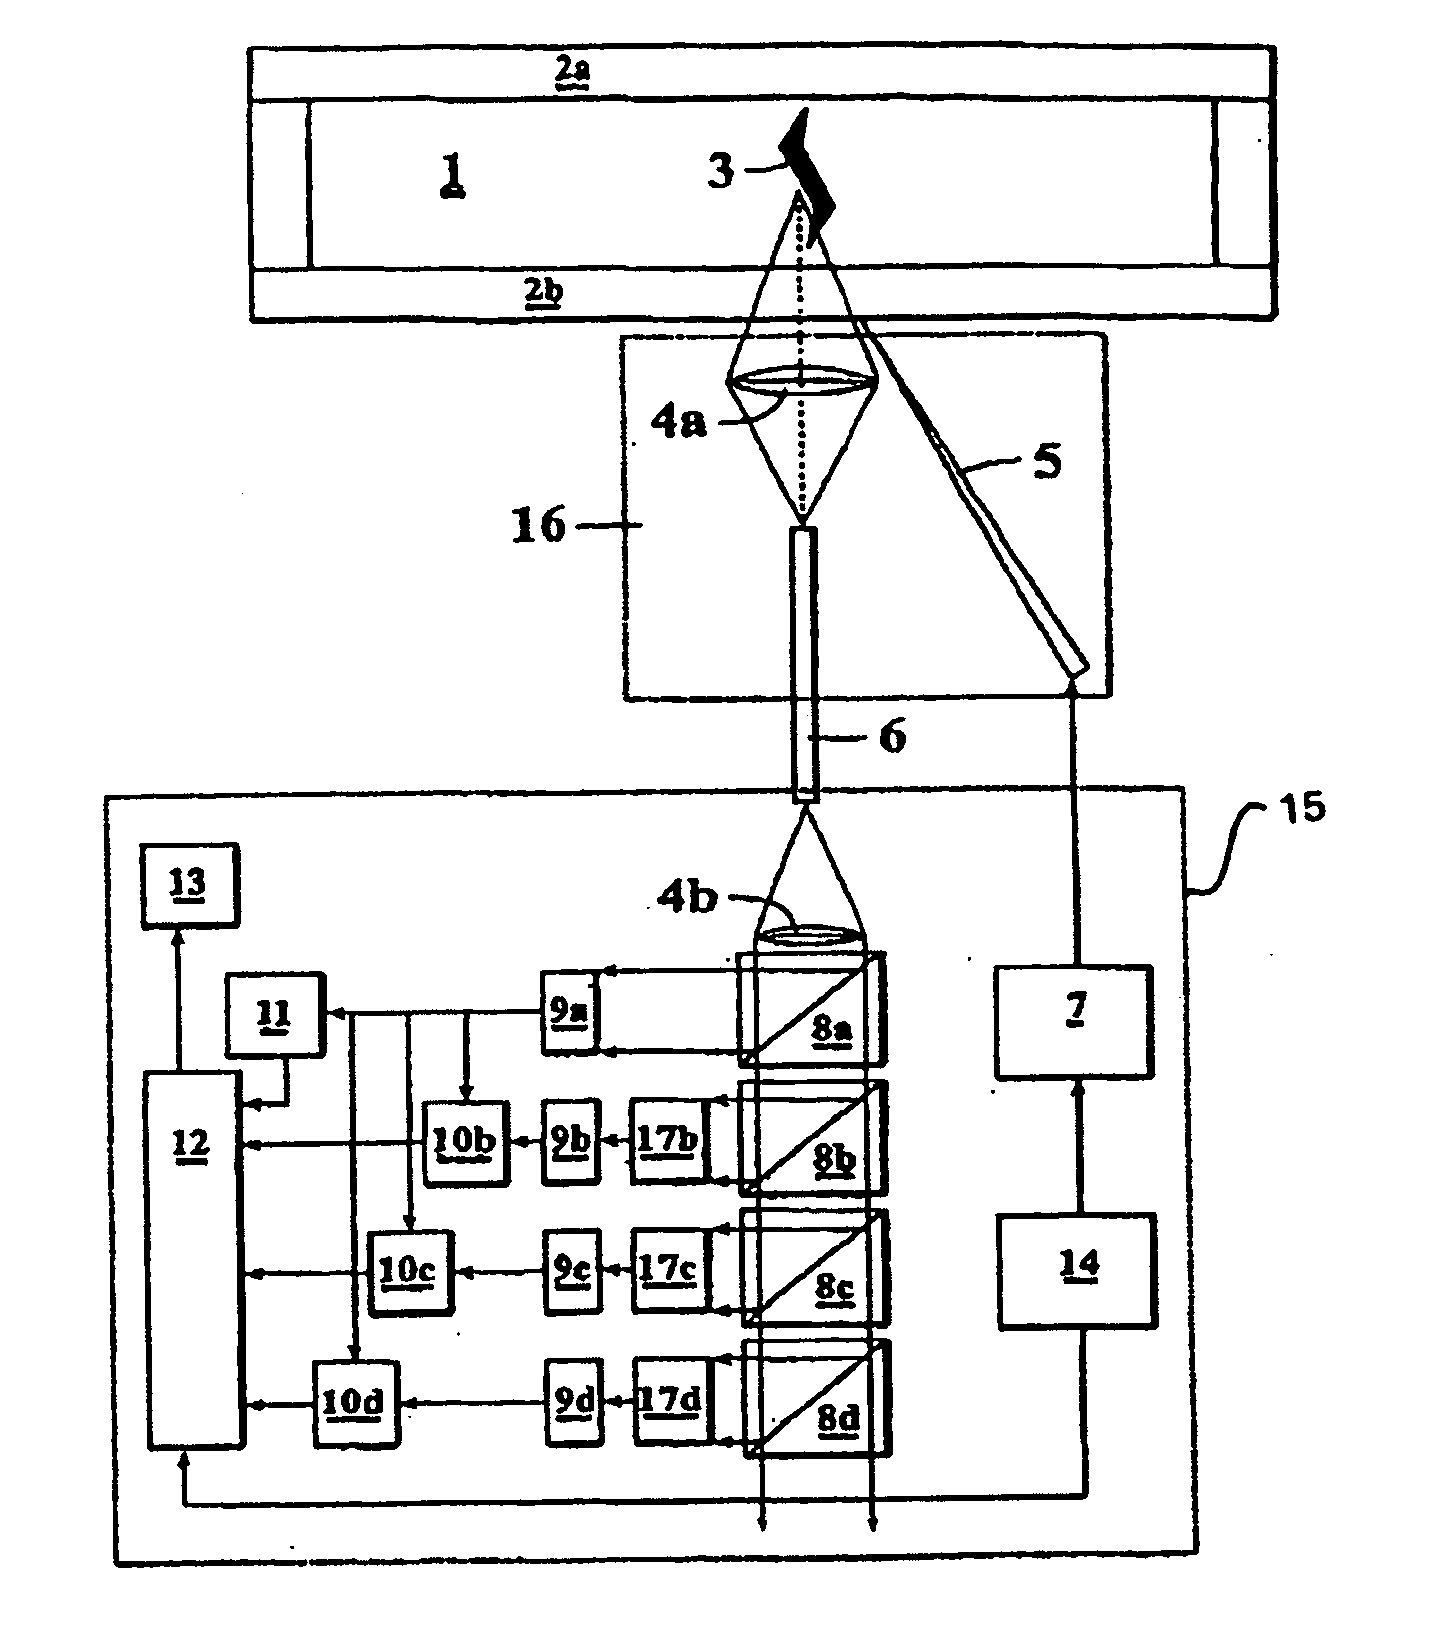 Apparatus for non-invasive analysis of gas compositions in insulated glass panes